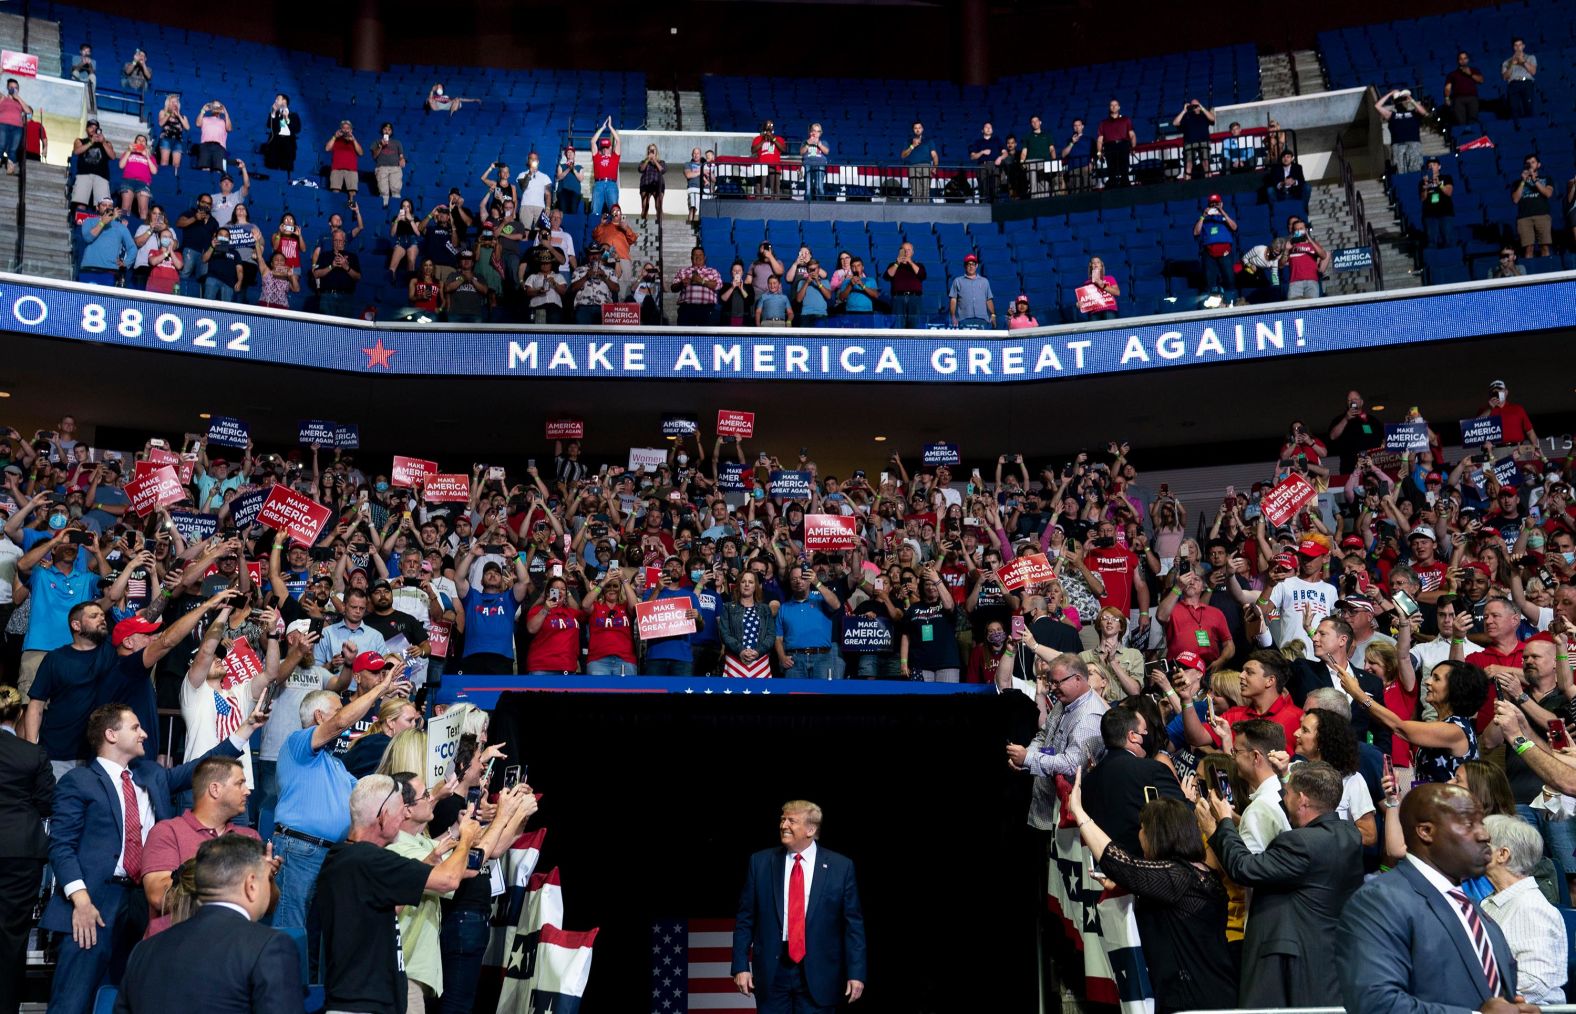 Trump arrives at <a href="index.php?page=&url=http%3A%2F%2Fwww.cnn.com%2F2020%2F06%2F20%2Fpolitics%2Fgallery%2Ftrump-rally-tulsa%2Findex.html" target="_blank">his campaign rally</a> in Tulsa, Oklahoma, in June 2020. It was his first rally since the start of the coronavirus pandemic, and the indoor venue <a href="index.php?page=&url=https%3A%2F%2Fwww.cnn.com%2F2020%2F06%2F20%2Fpolitics%2Fdonald-trump-rally-tulsa-coronavirus%2Findex.html" target="_blank">generated concerns</a> about the potential spread of the virus. <a href="index.php?page=&url=https%3A%2F%2Fwww.cnn.com%2F2020%2F06%2F21%2Fpolitics%2Ftrump-rally-tulsa-attendance%2Findex.html" target="_blank">About 6,200 people showed up</a> to the BOK Center, which seats 19,199.